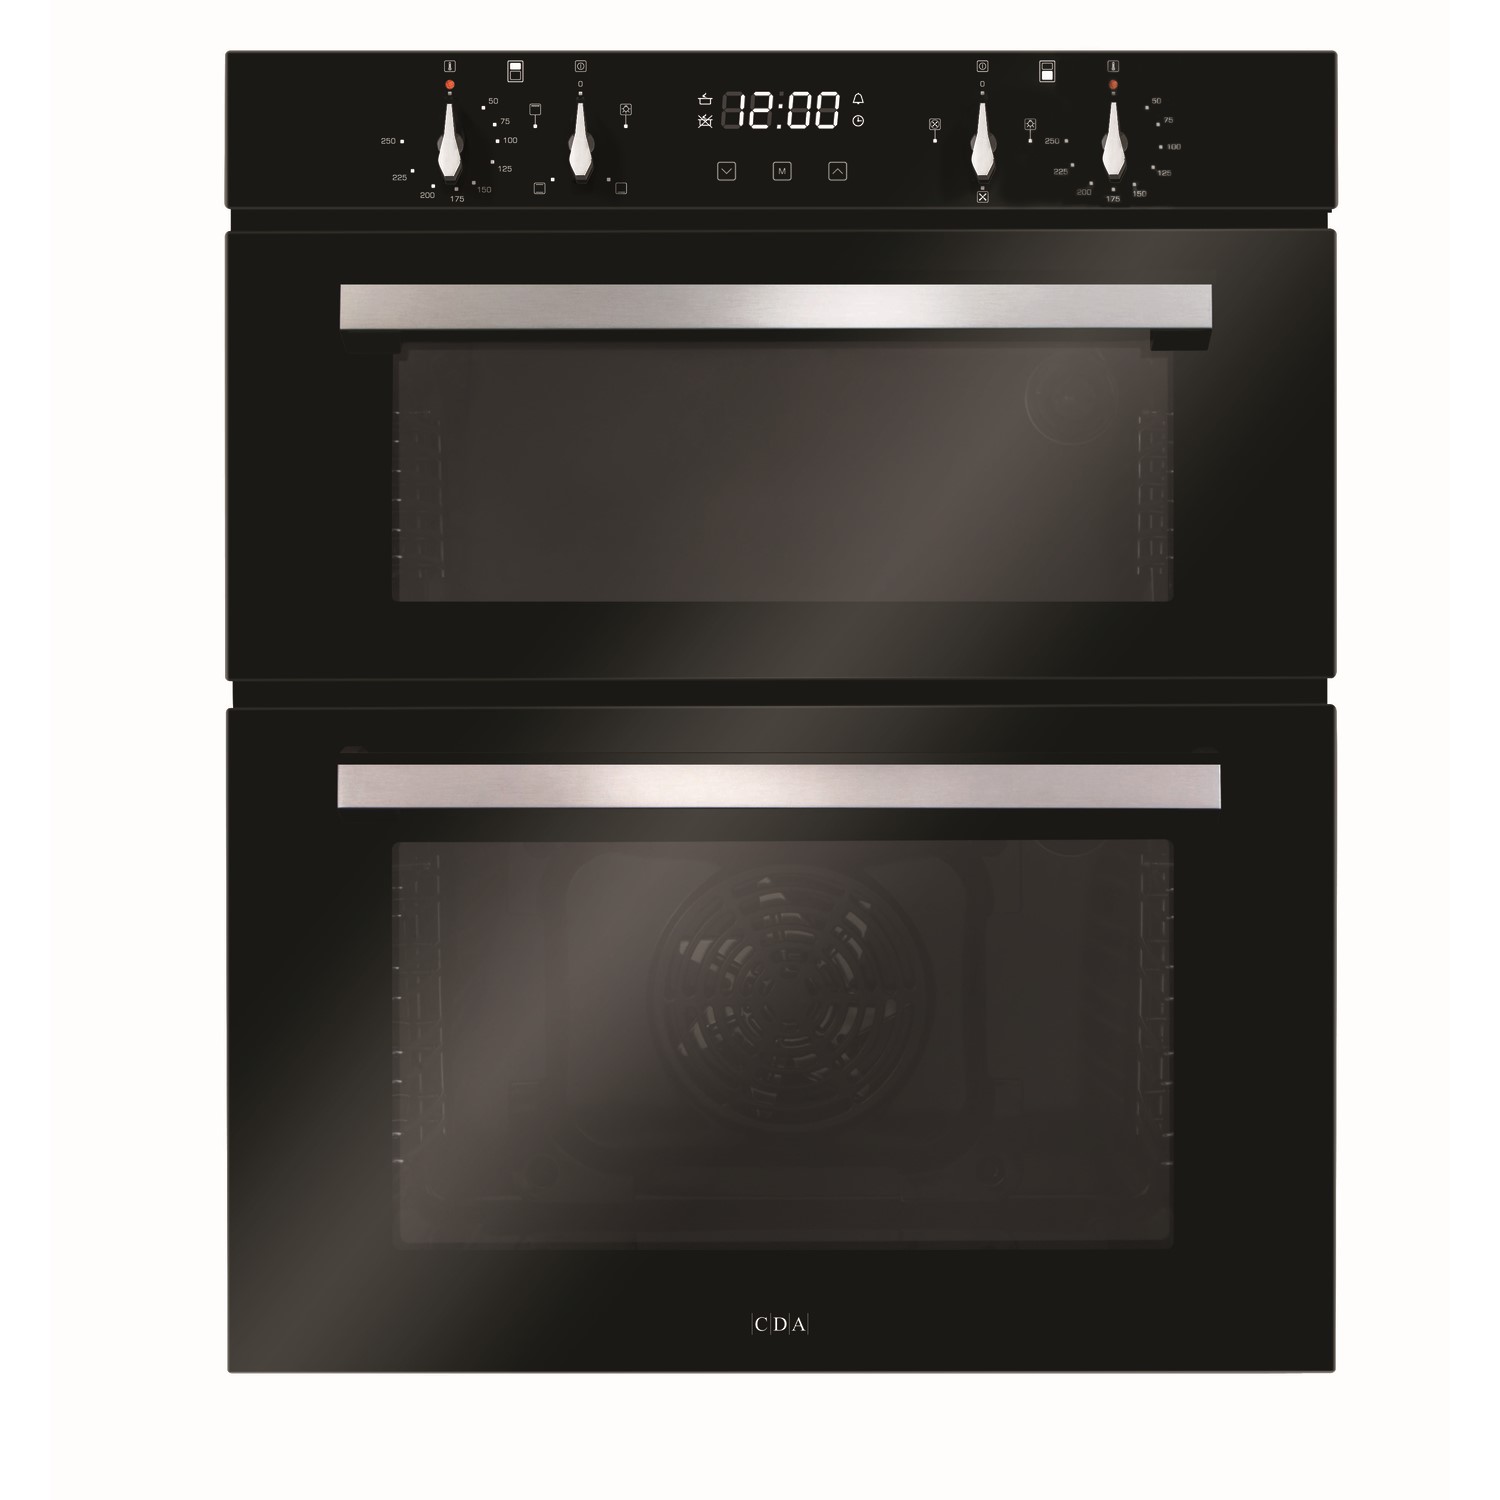 Refurbished CDA DC741BL 60cm Double Built Under Electric Oven